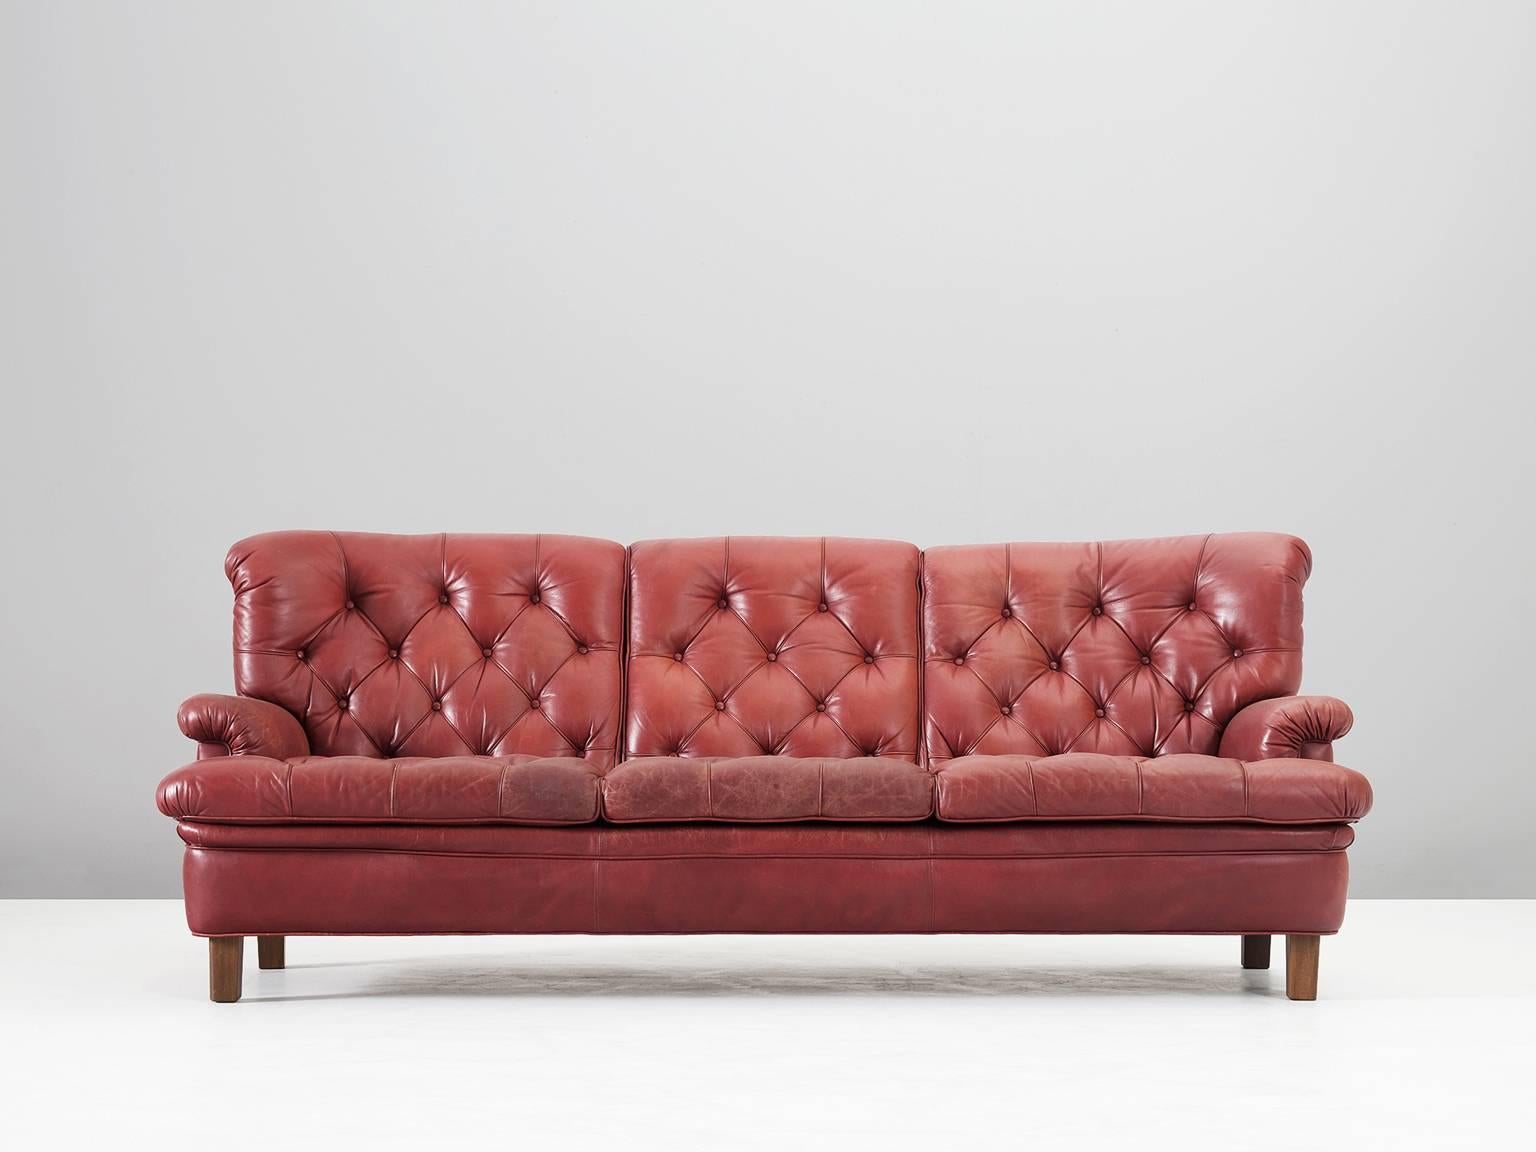 Sofa, in leather and wood, by Arne Norell, Sweden, circa 1964. 

Three-seater sofa by Arne Norell. This sofa is refined, modern and with a classical touch. A true Swedish and Norell design. The sofa is made of red leather with four cubic wooden